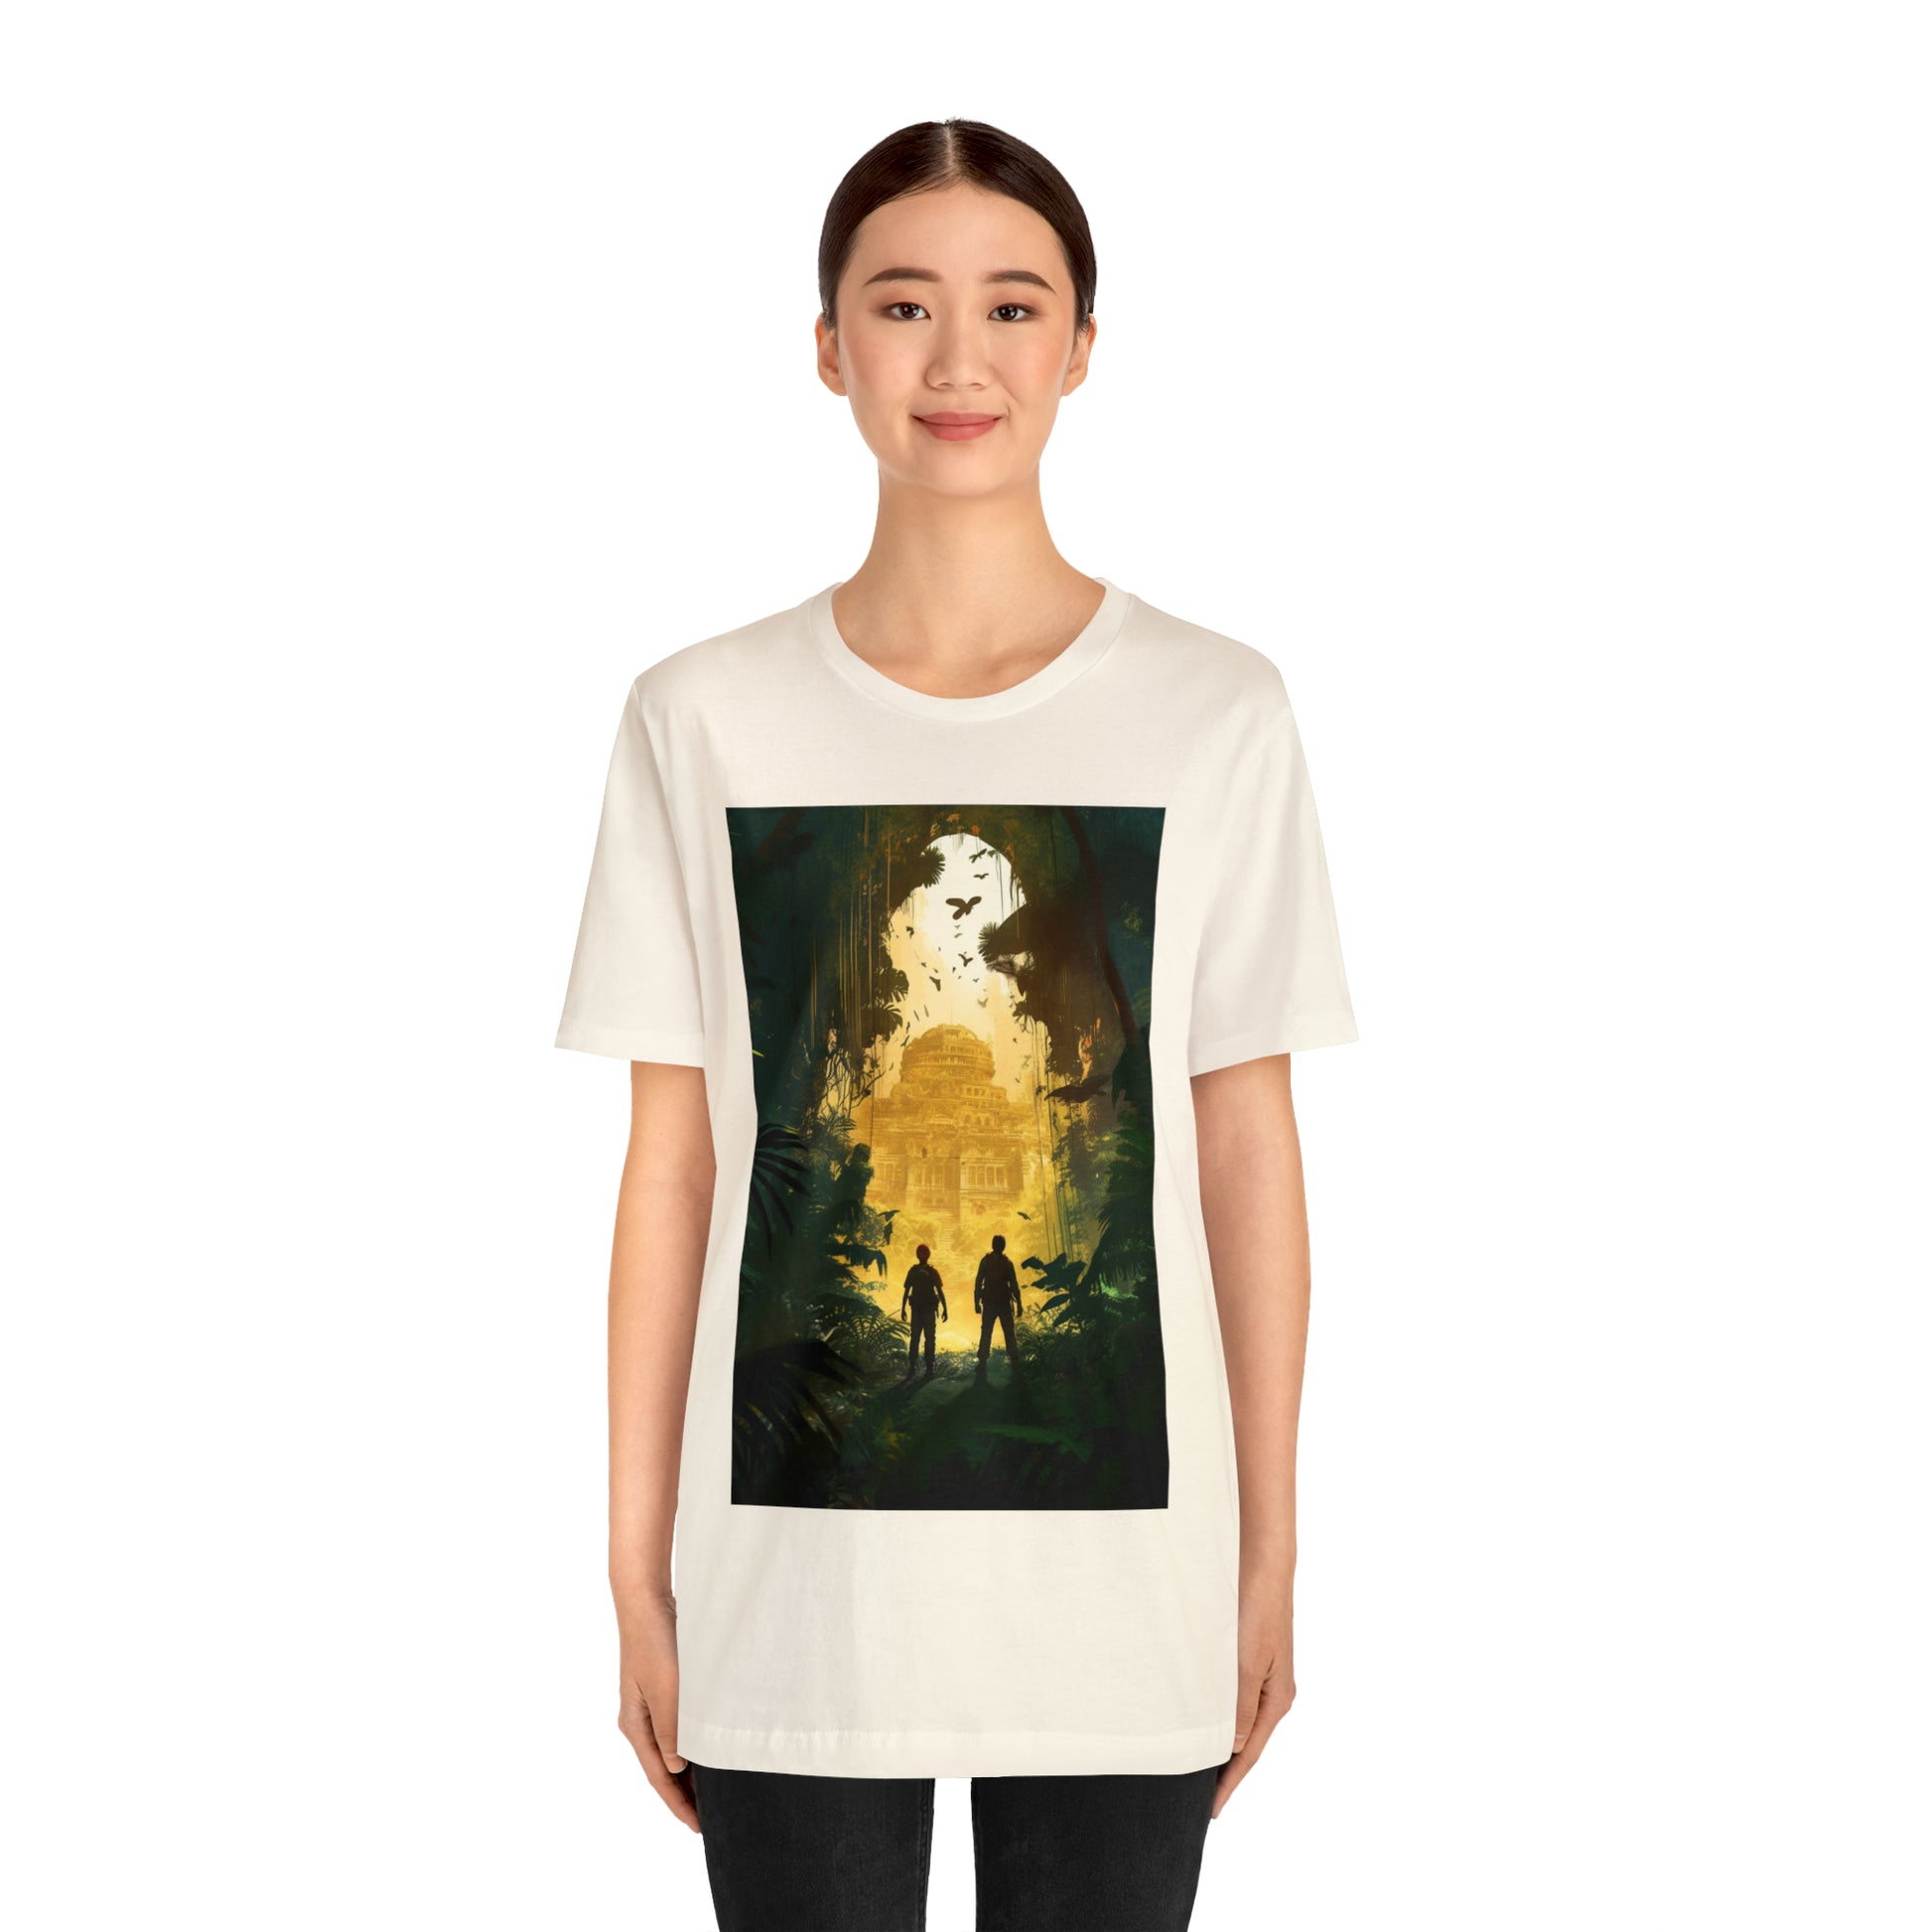 natural-quest-thread-tee-shirt-with-ruins-of-arnak-scene-on-front